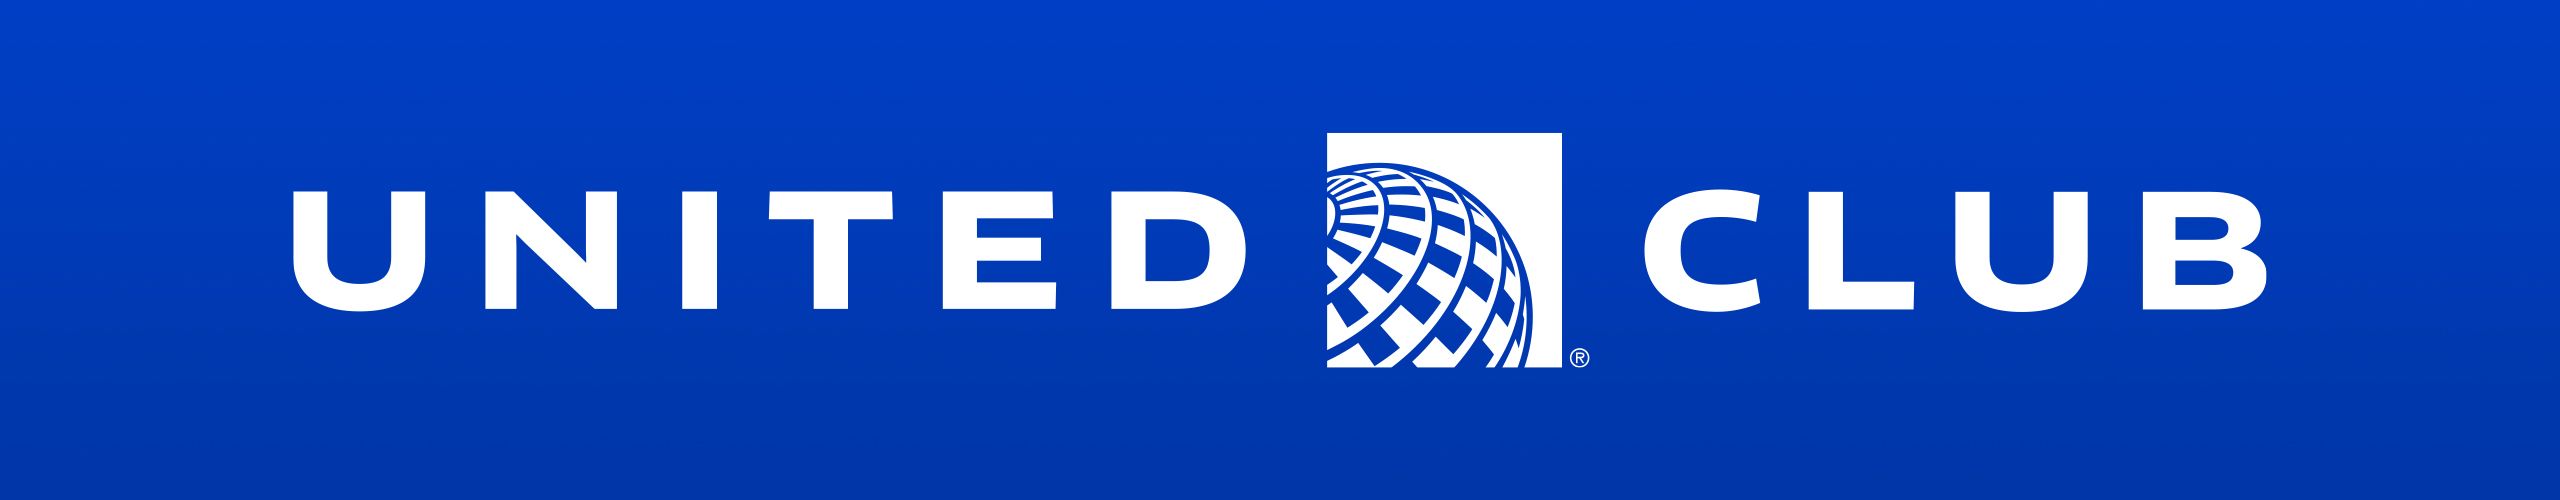 United Club  Empower Field at Mile High